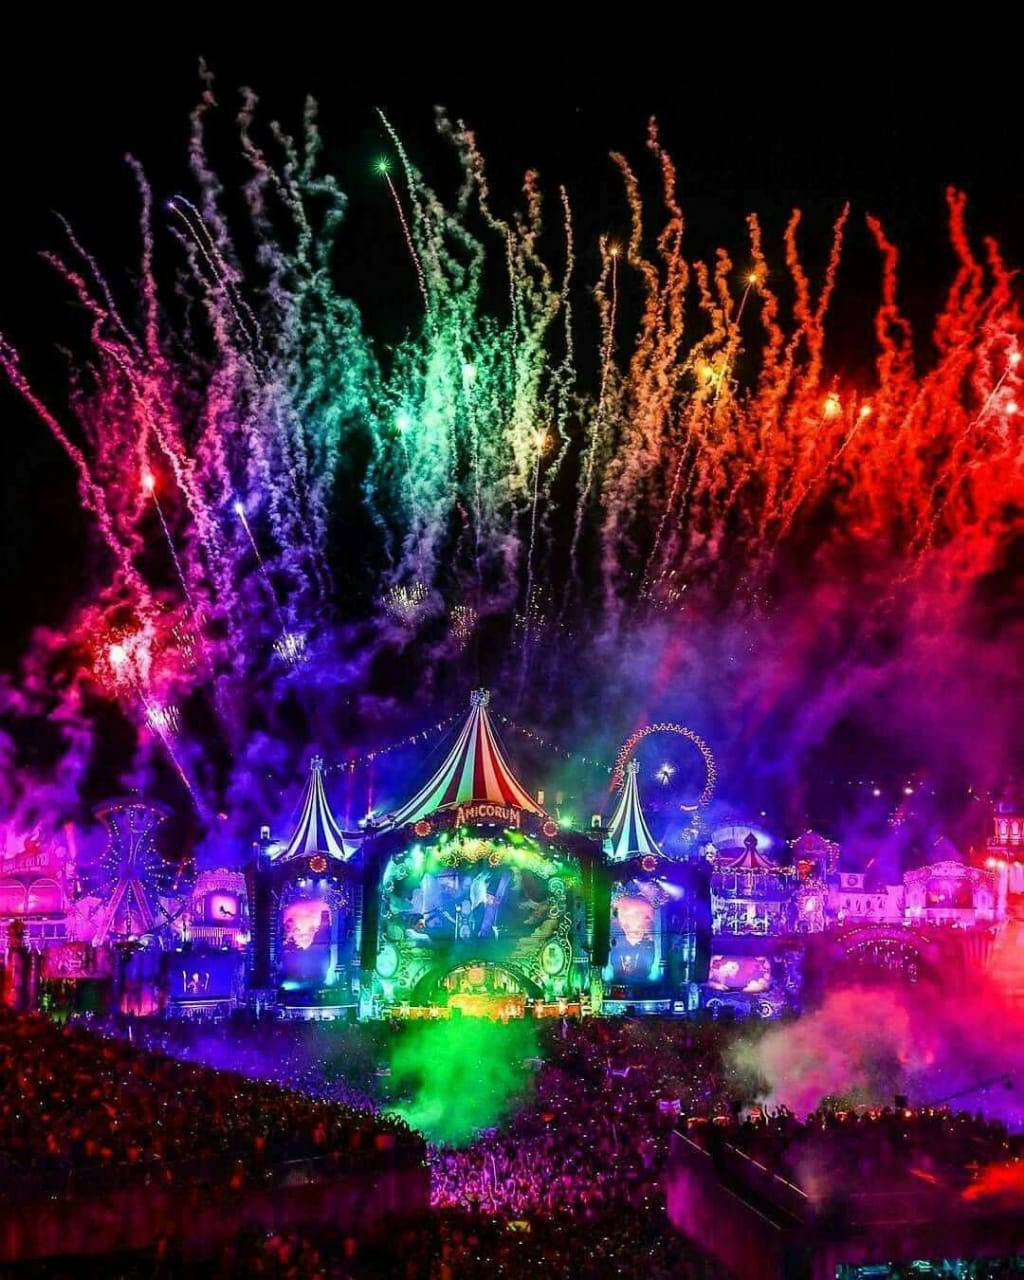 Tomorrowland Carnival Stage Wallpaper: Tag scenen fra en Tomorrowland-karneval! Wallpaper